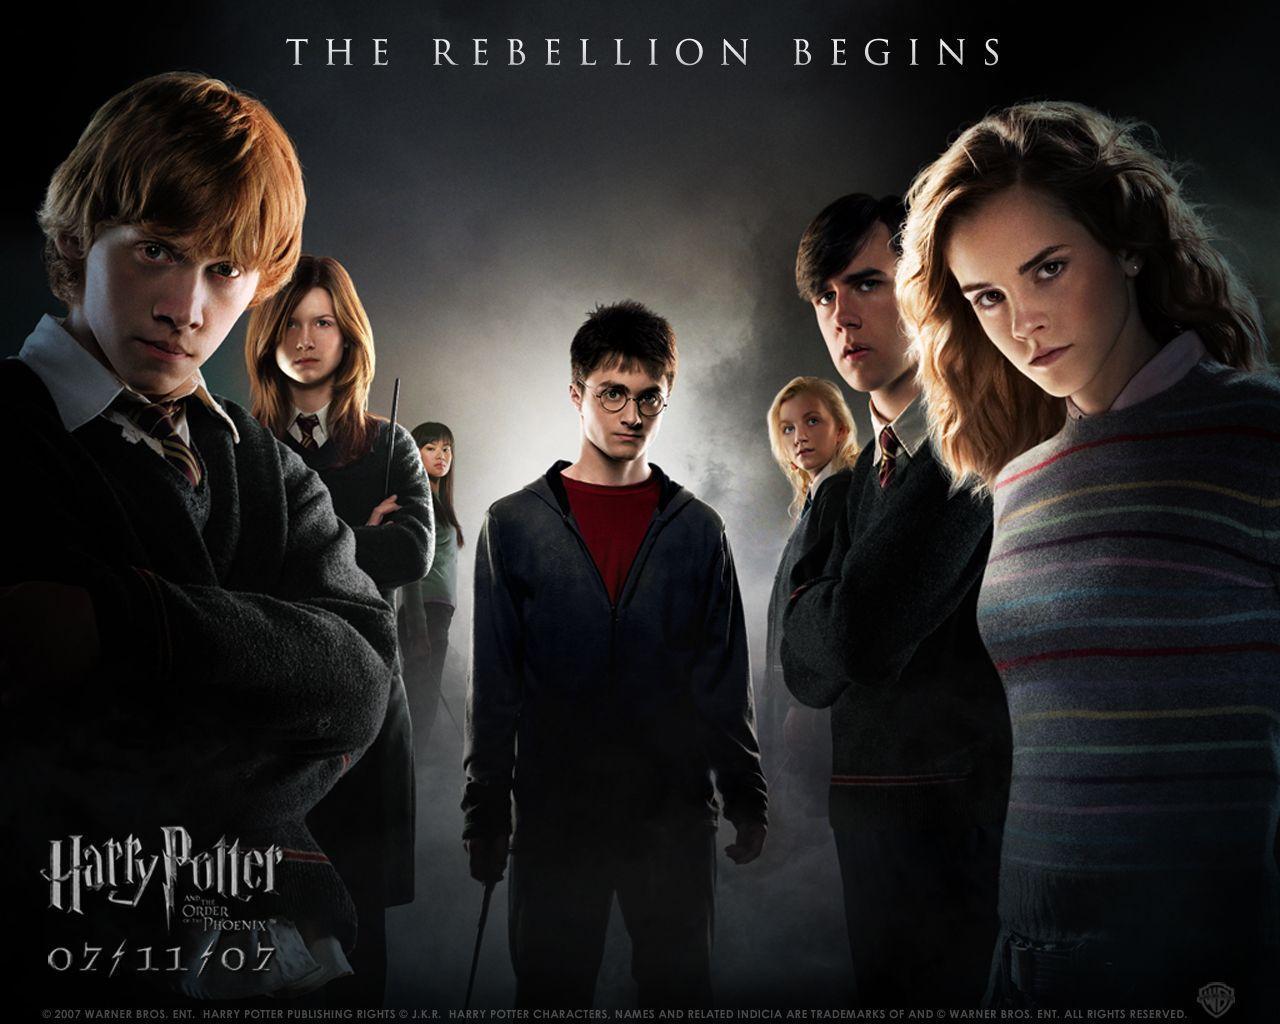 Excellent Wallpaper from Harry Potter Movie 1280x1024PX Harry